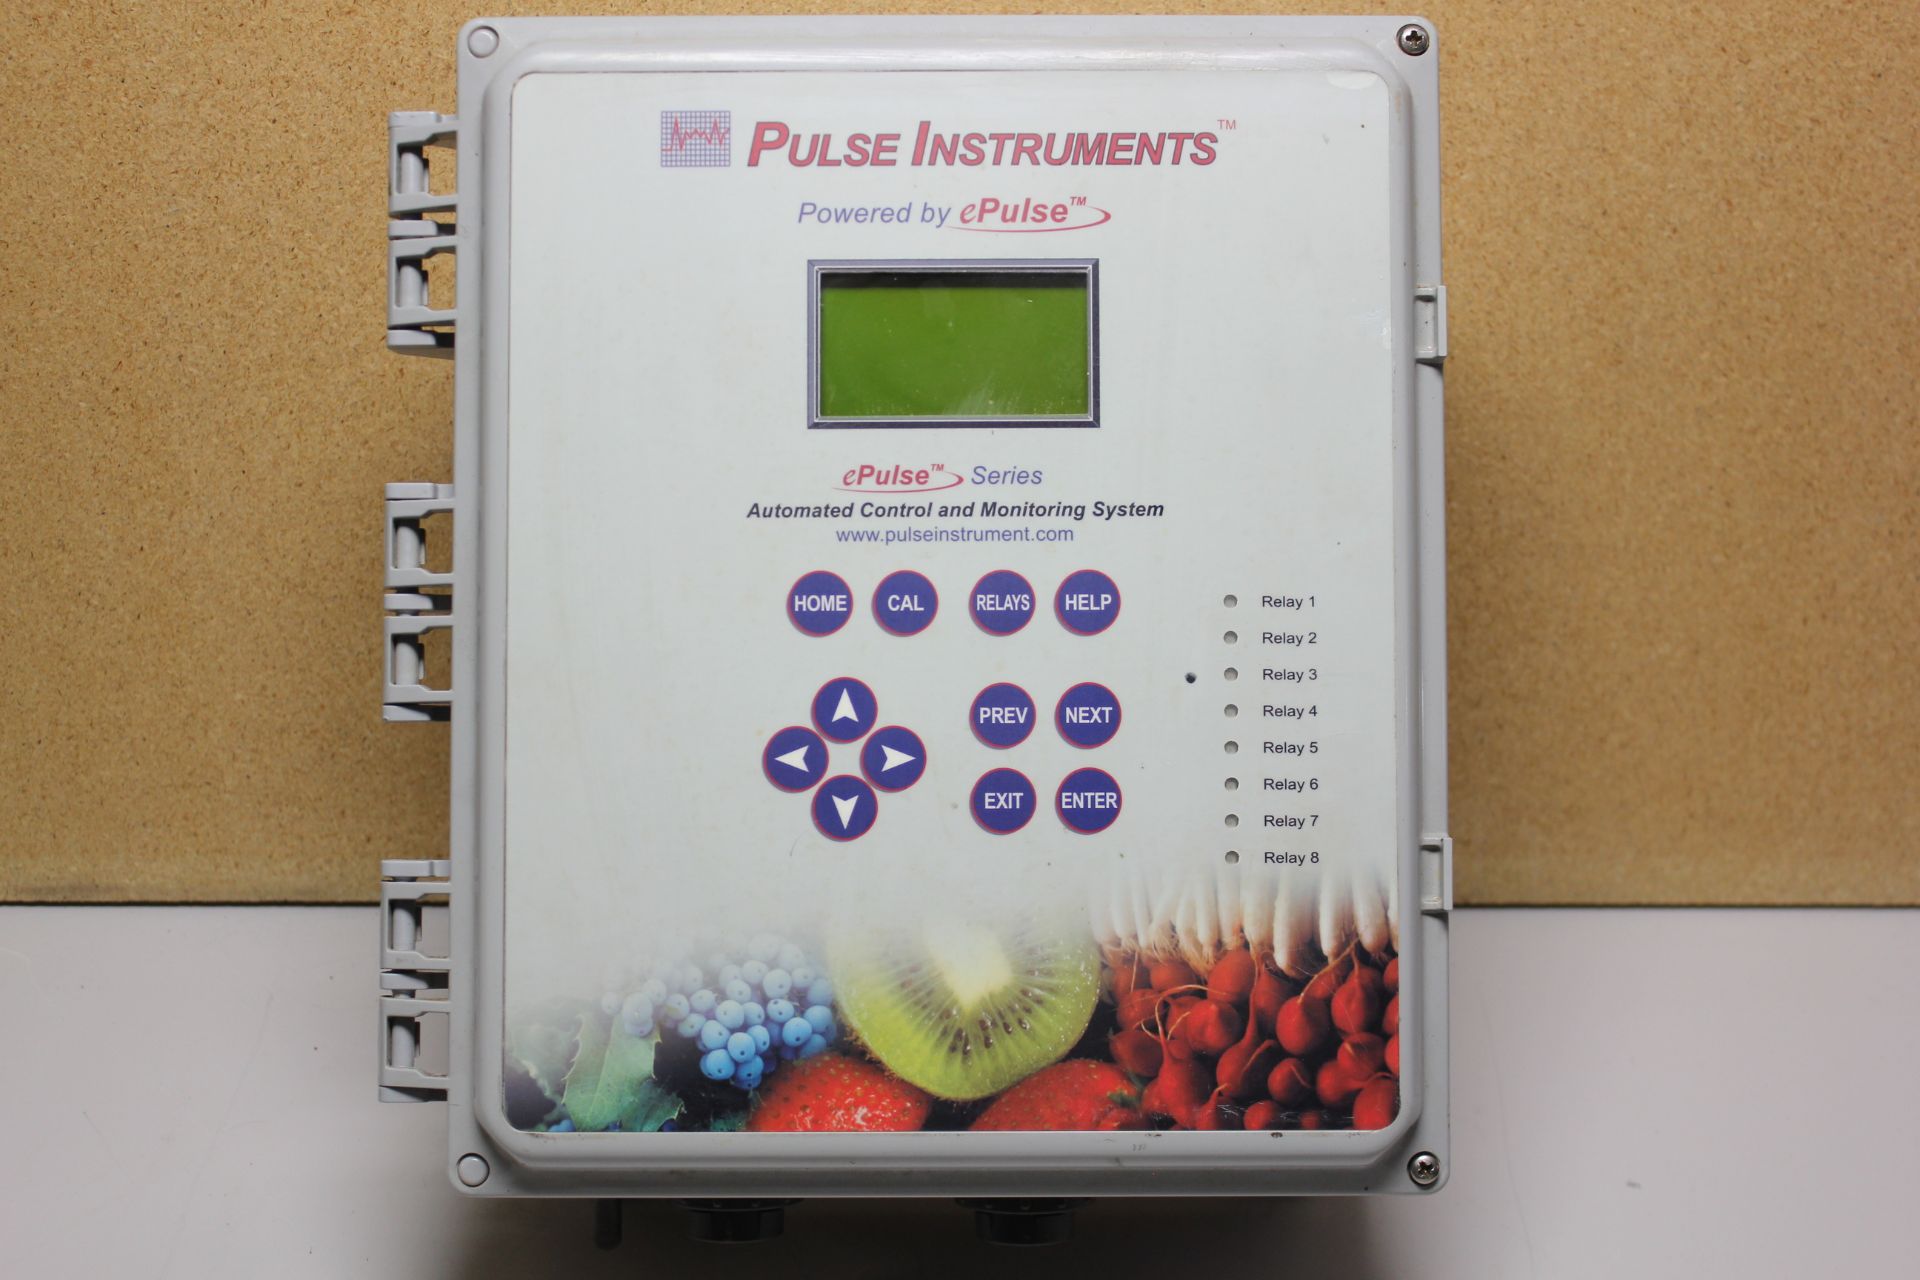 PULSE INSTRUMENTS AUTOMATED CONTROL & MONITORING SYSTEM